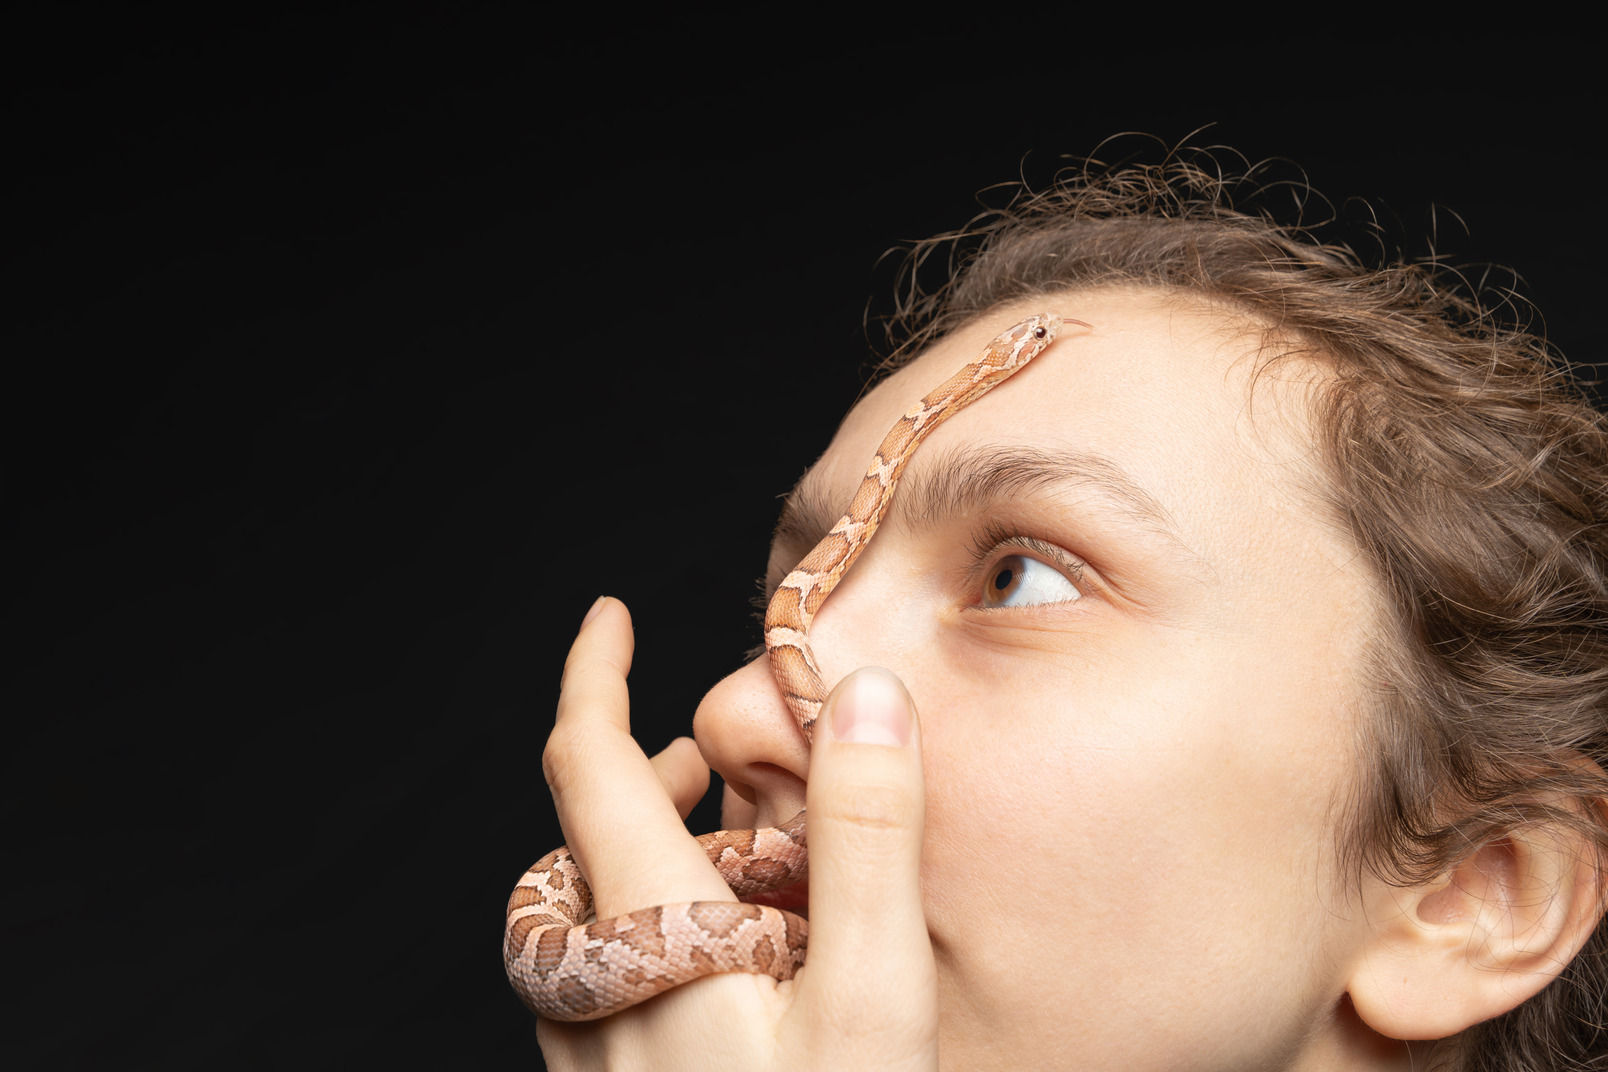 Little corn snake crawling upon young woman's forehead